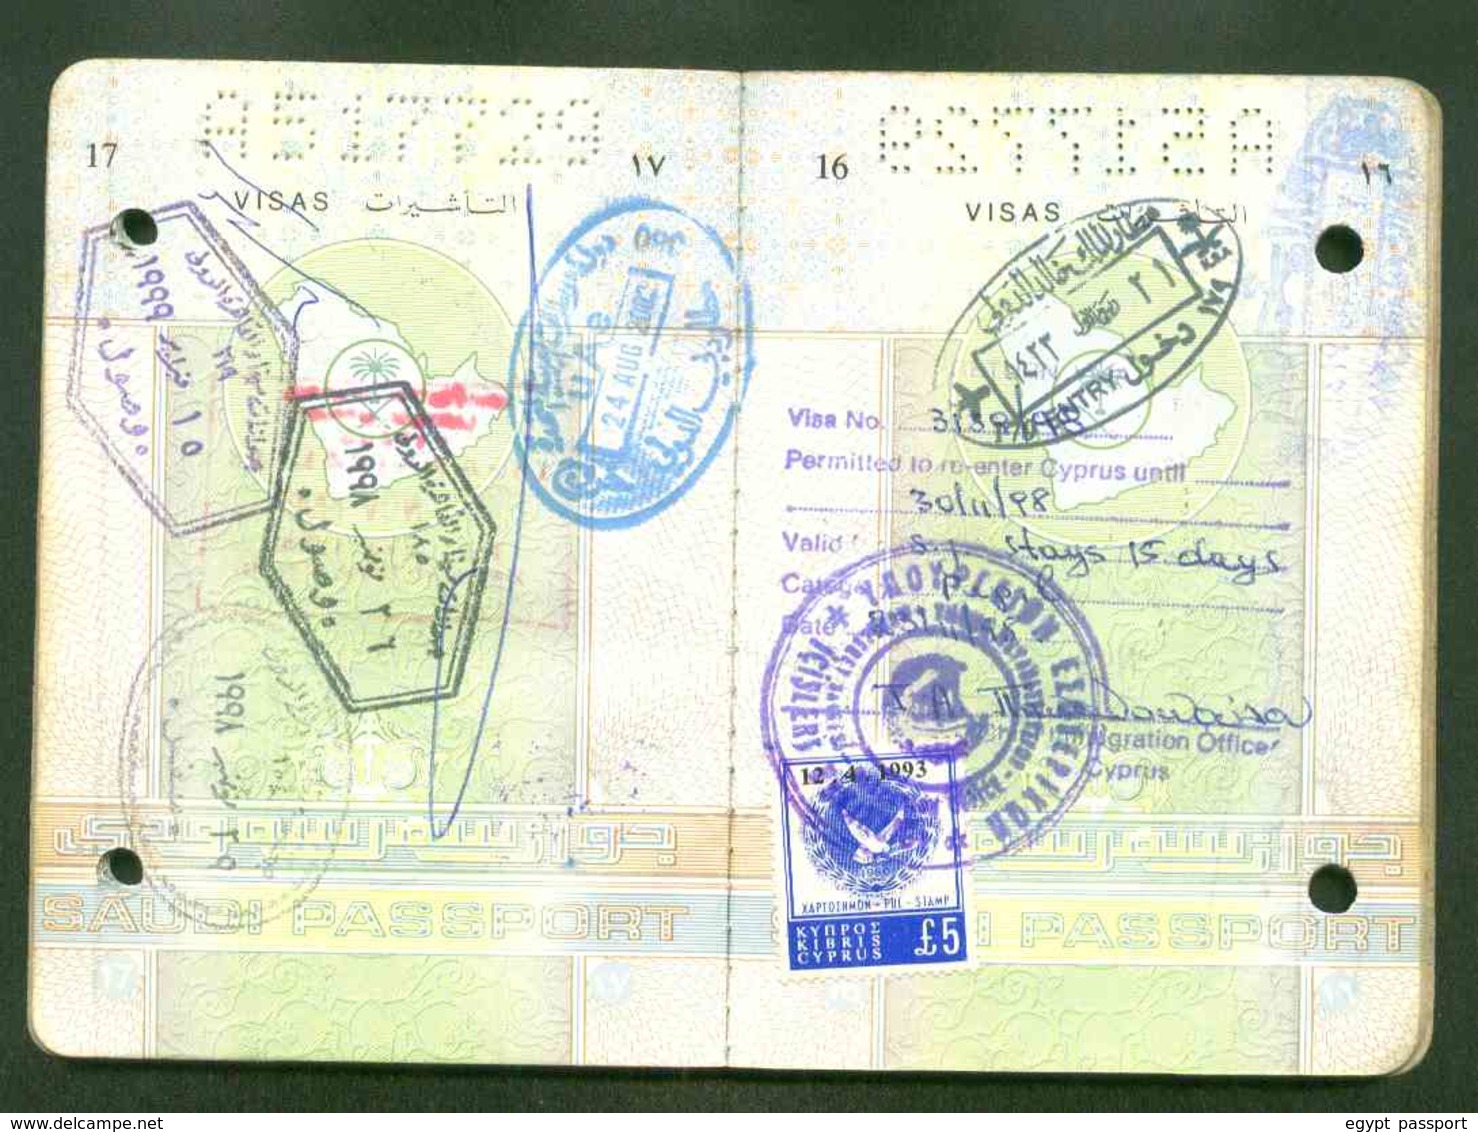 Saudi Arabia expired passport issue 1997 - Cancelled by Two punching holes through the passport - Condition as in Scan